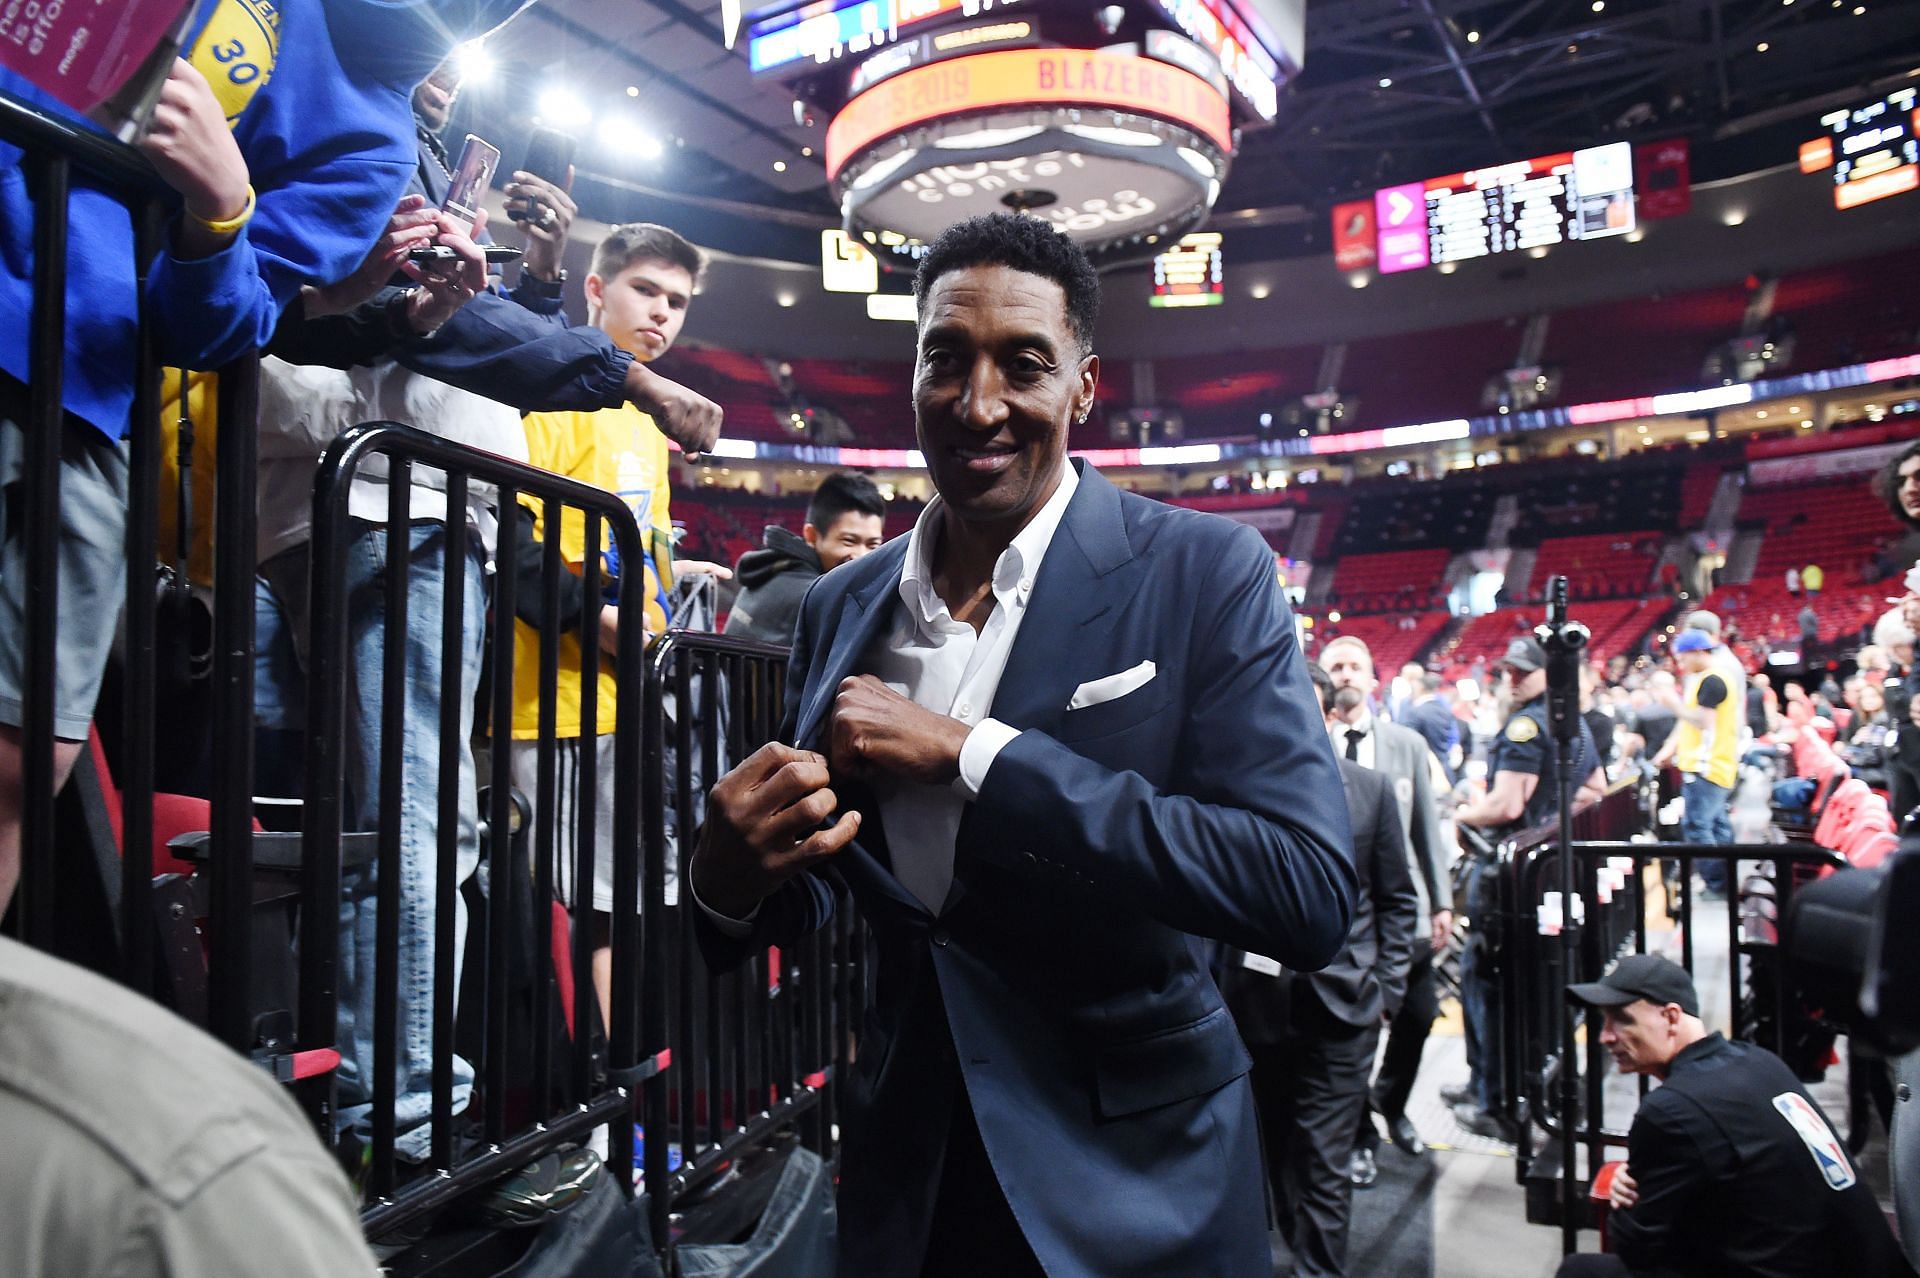 NBA Hall-of-Famer and six-time NBA champion Scottie Pippen